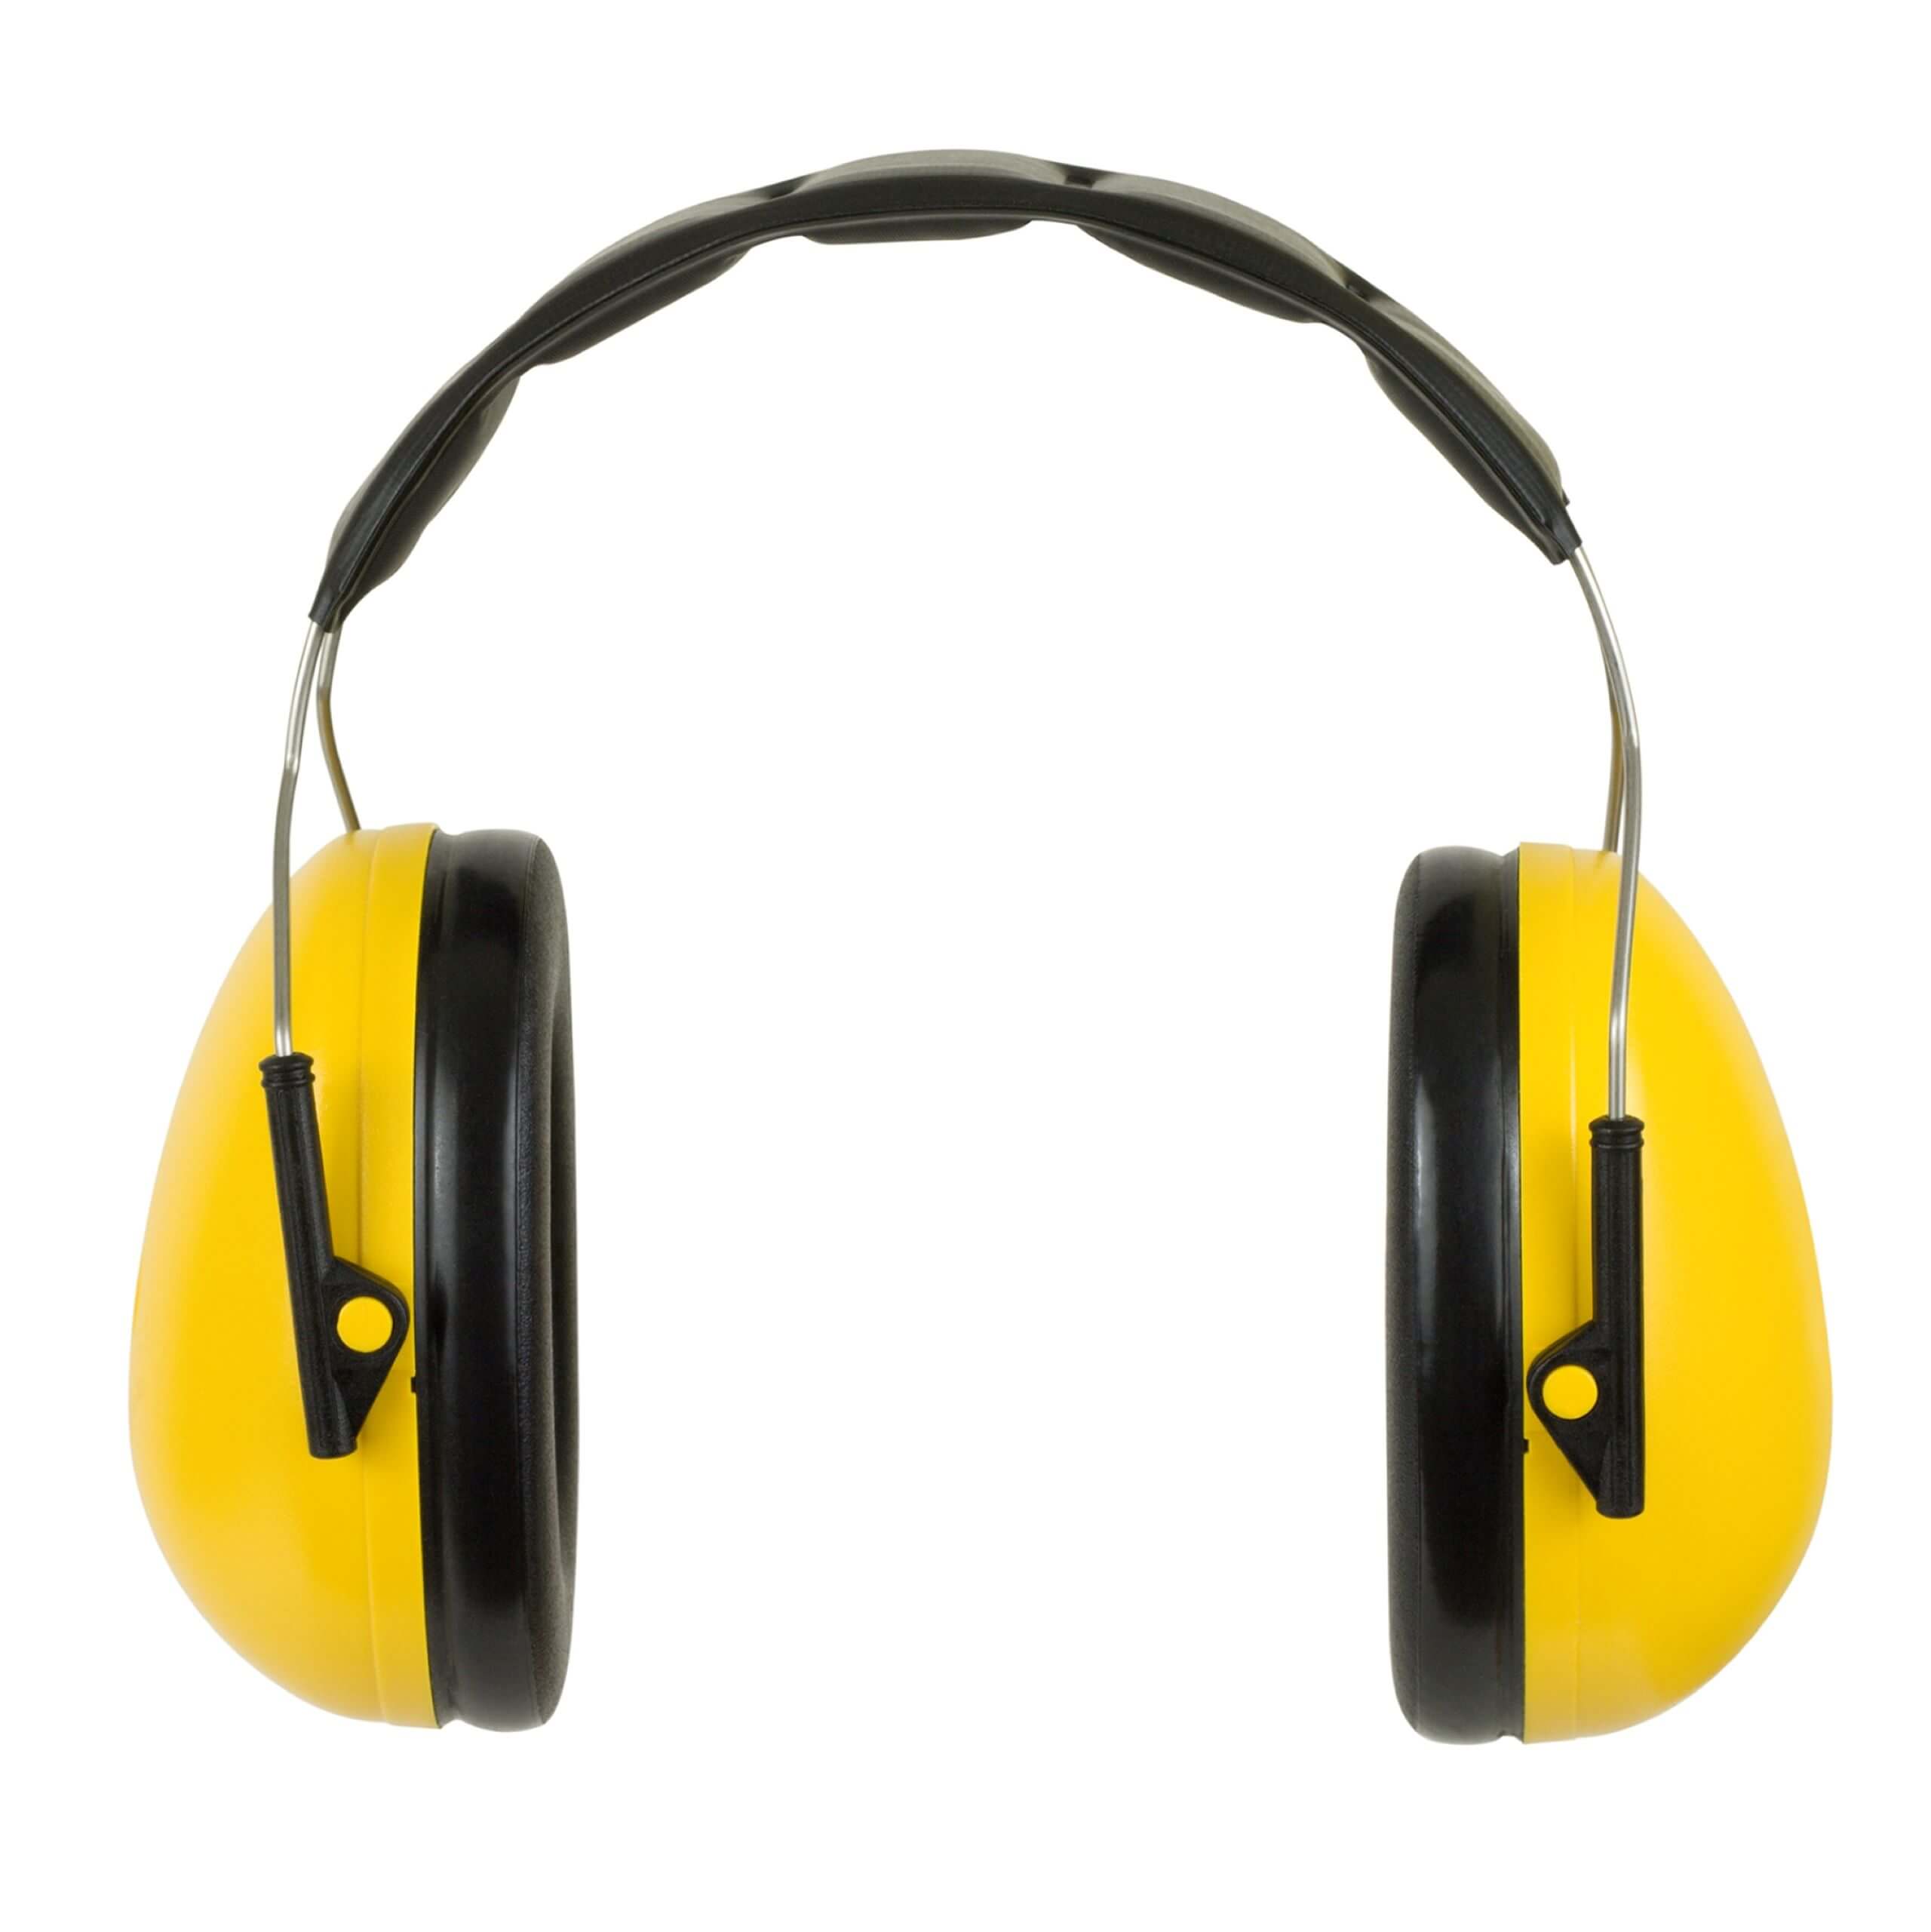 An image of our Industrial Ear Muffs.